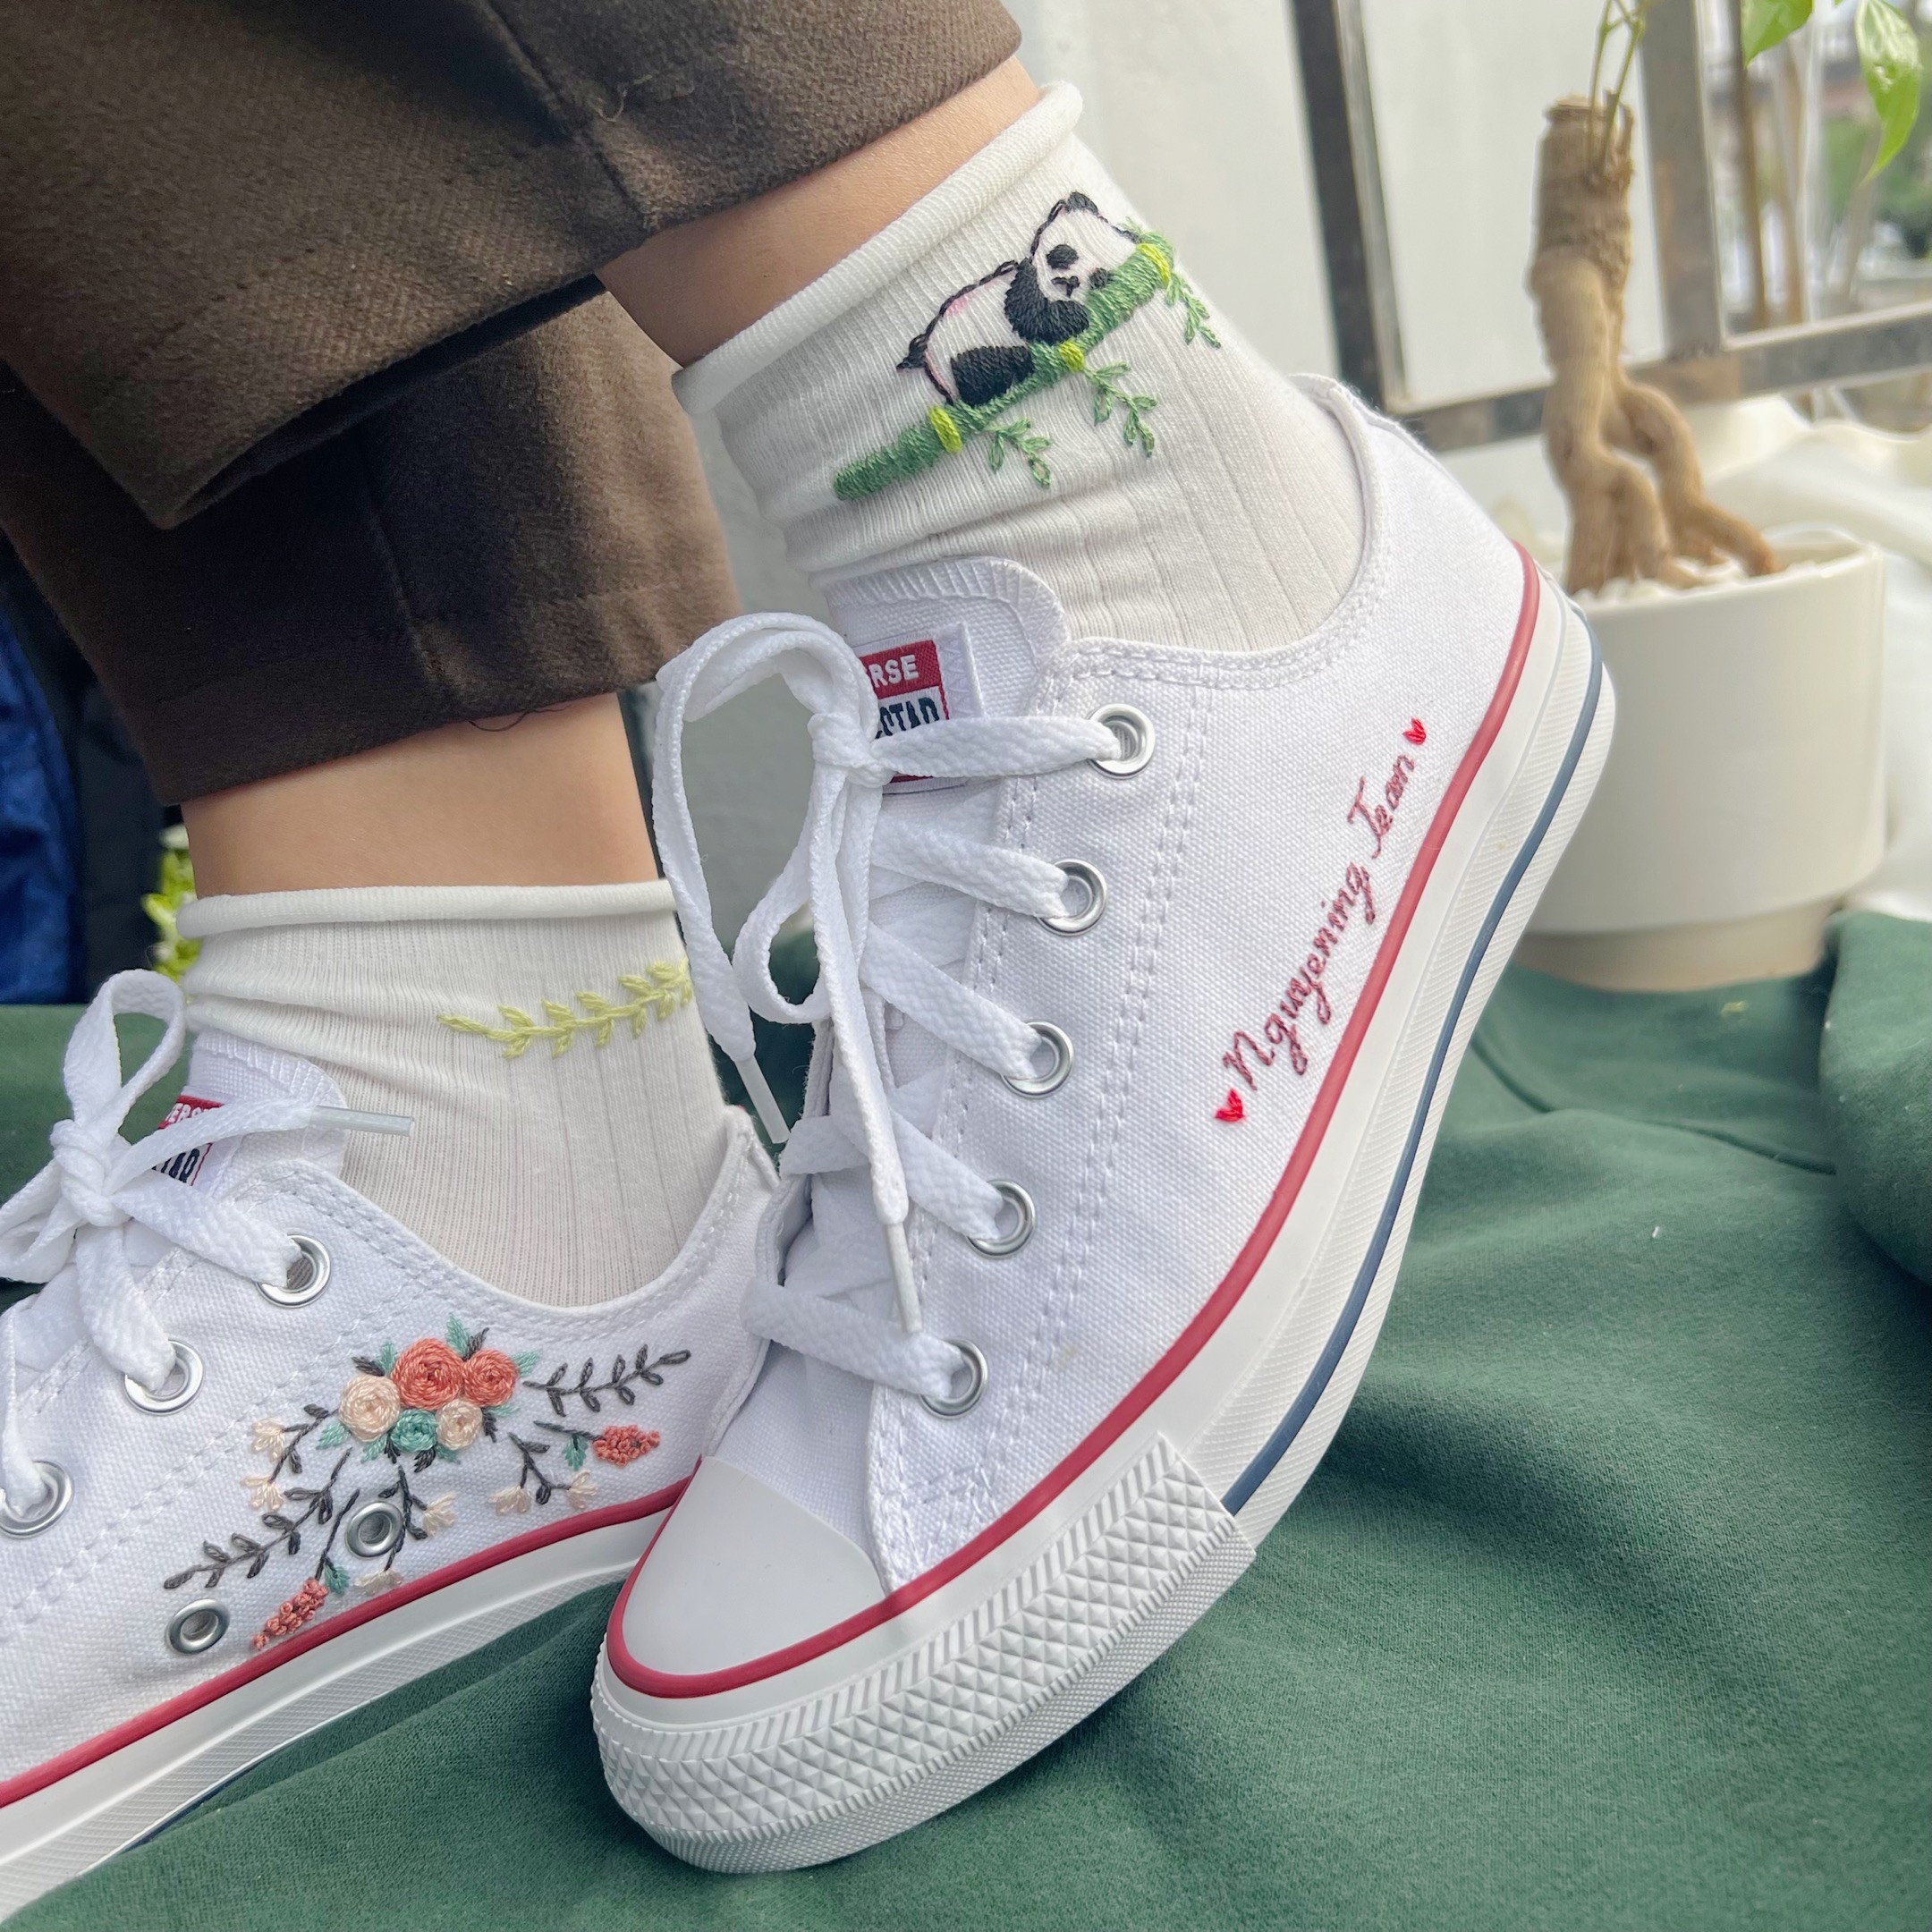 Embroidered Converse/wedding Converse/converse Low Tops - Etsy